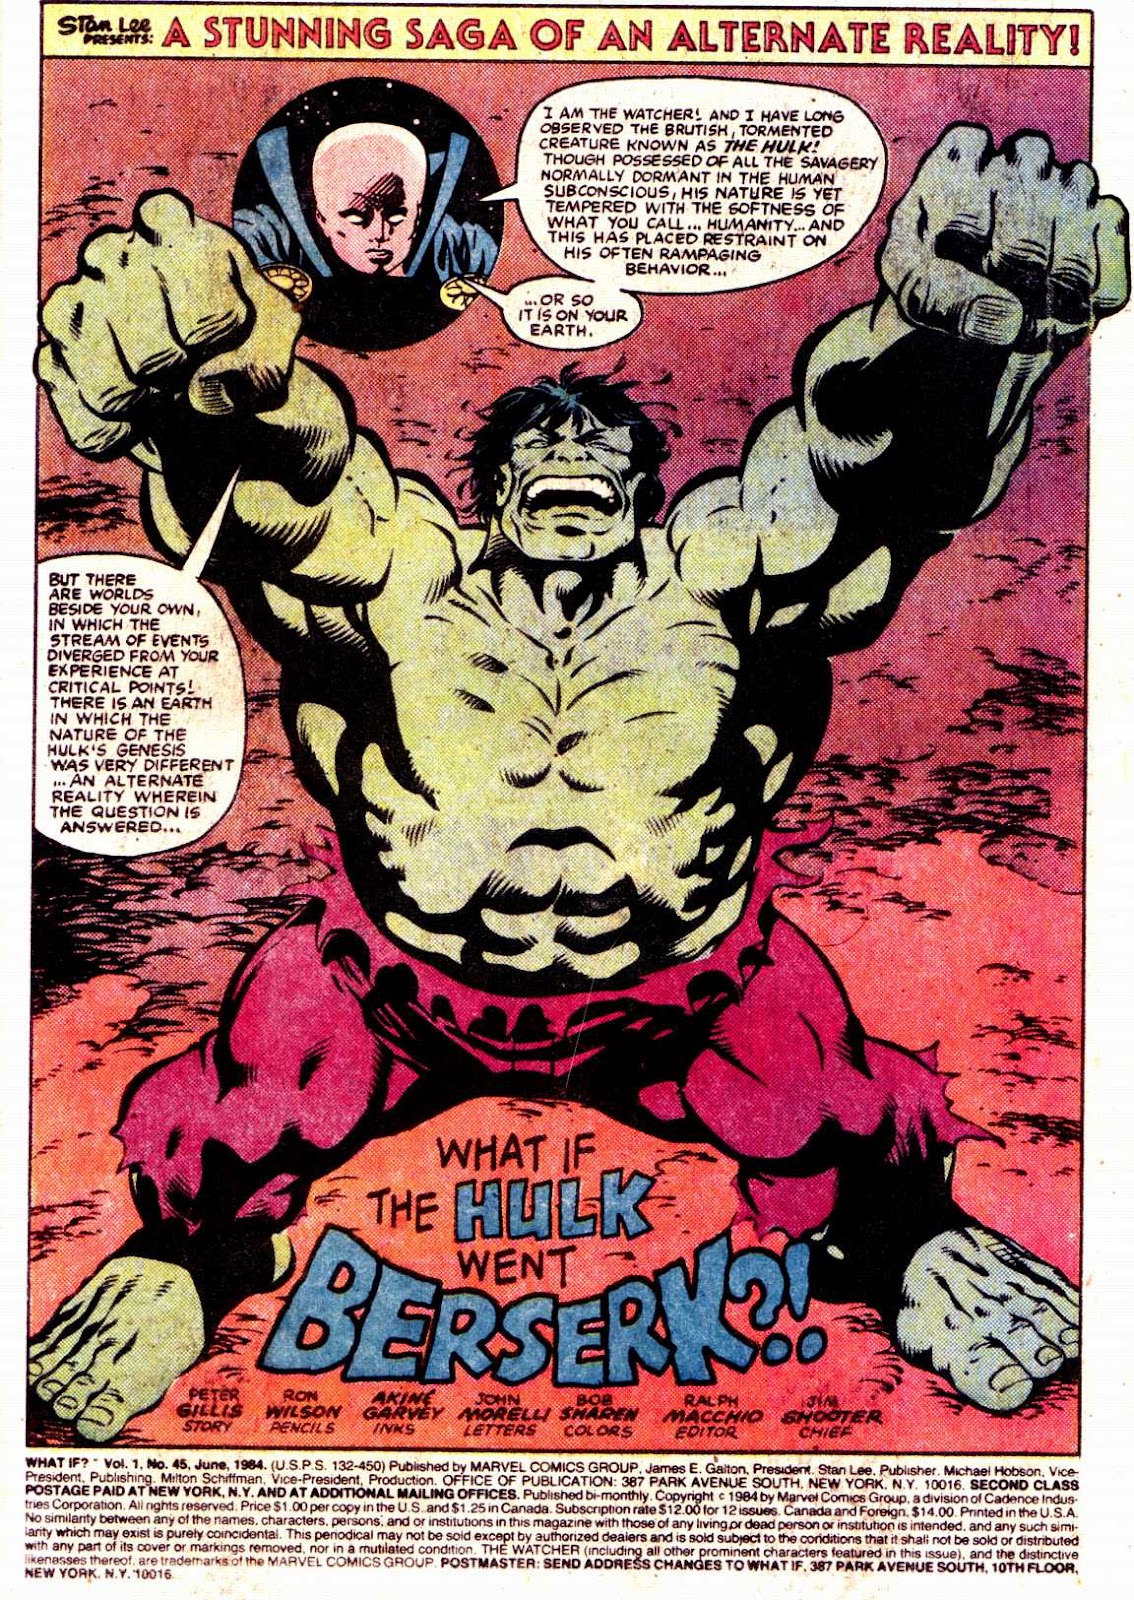 What If? (1977) issue 45 - The Hulk went Berserk - Page 2